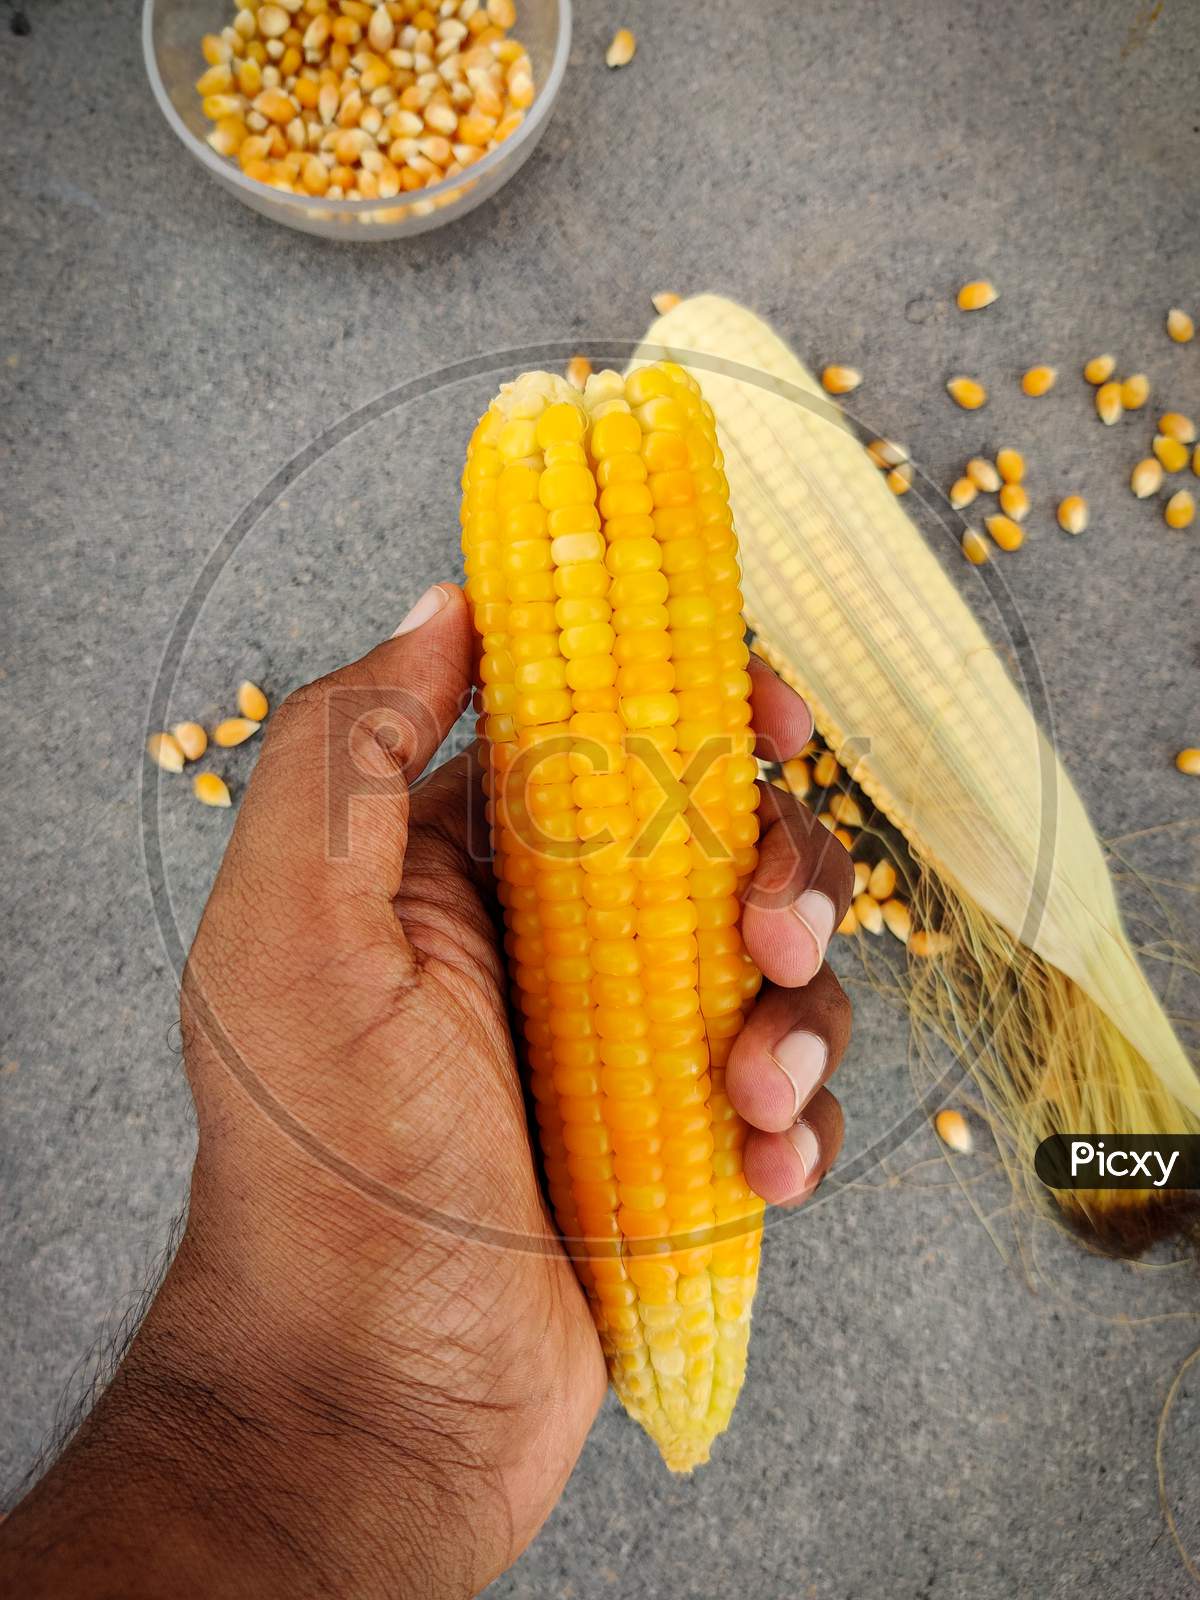 South Indian Man Holding Home Made Boiled Corn In His Hand. With Uncooked Corn And Scatterd Unpopped Popcorn Grains In Grey Background.